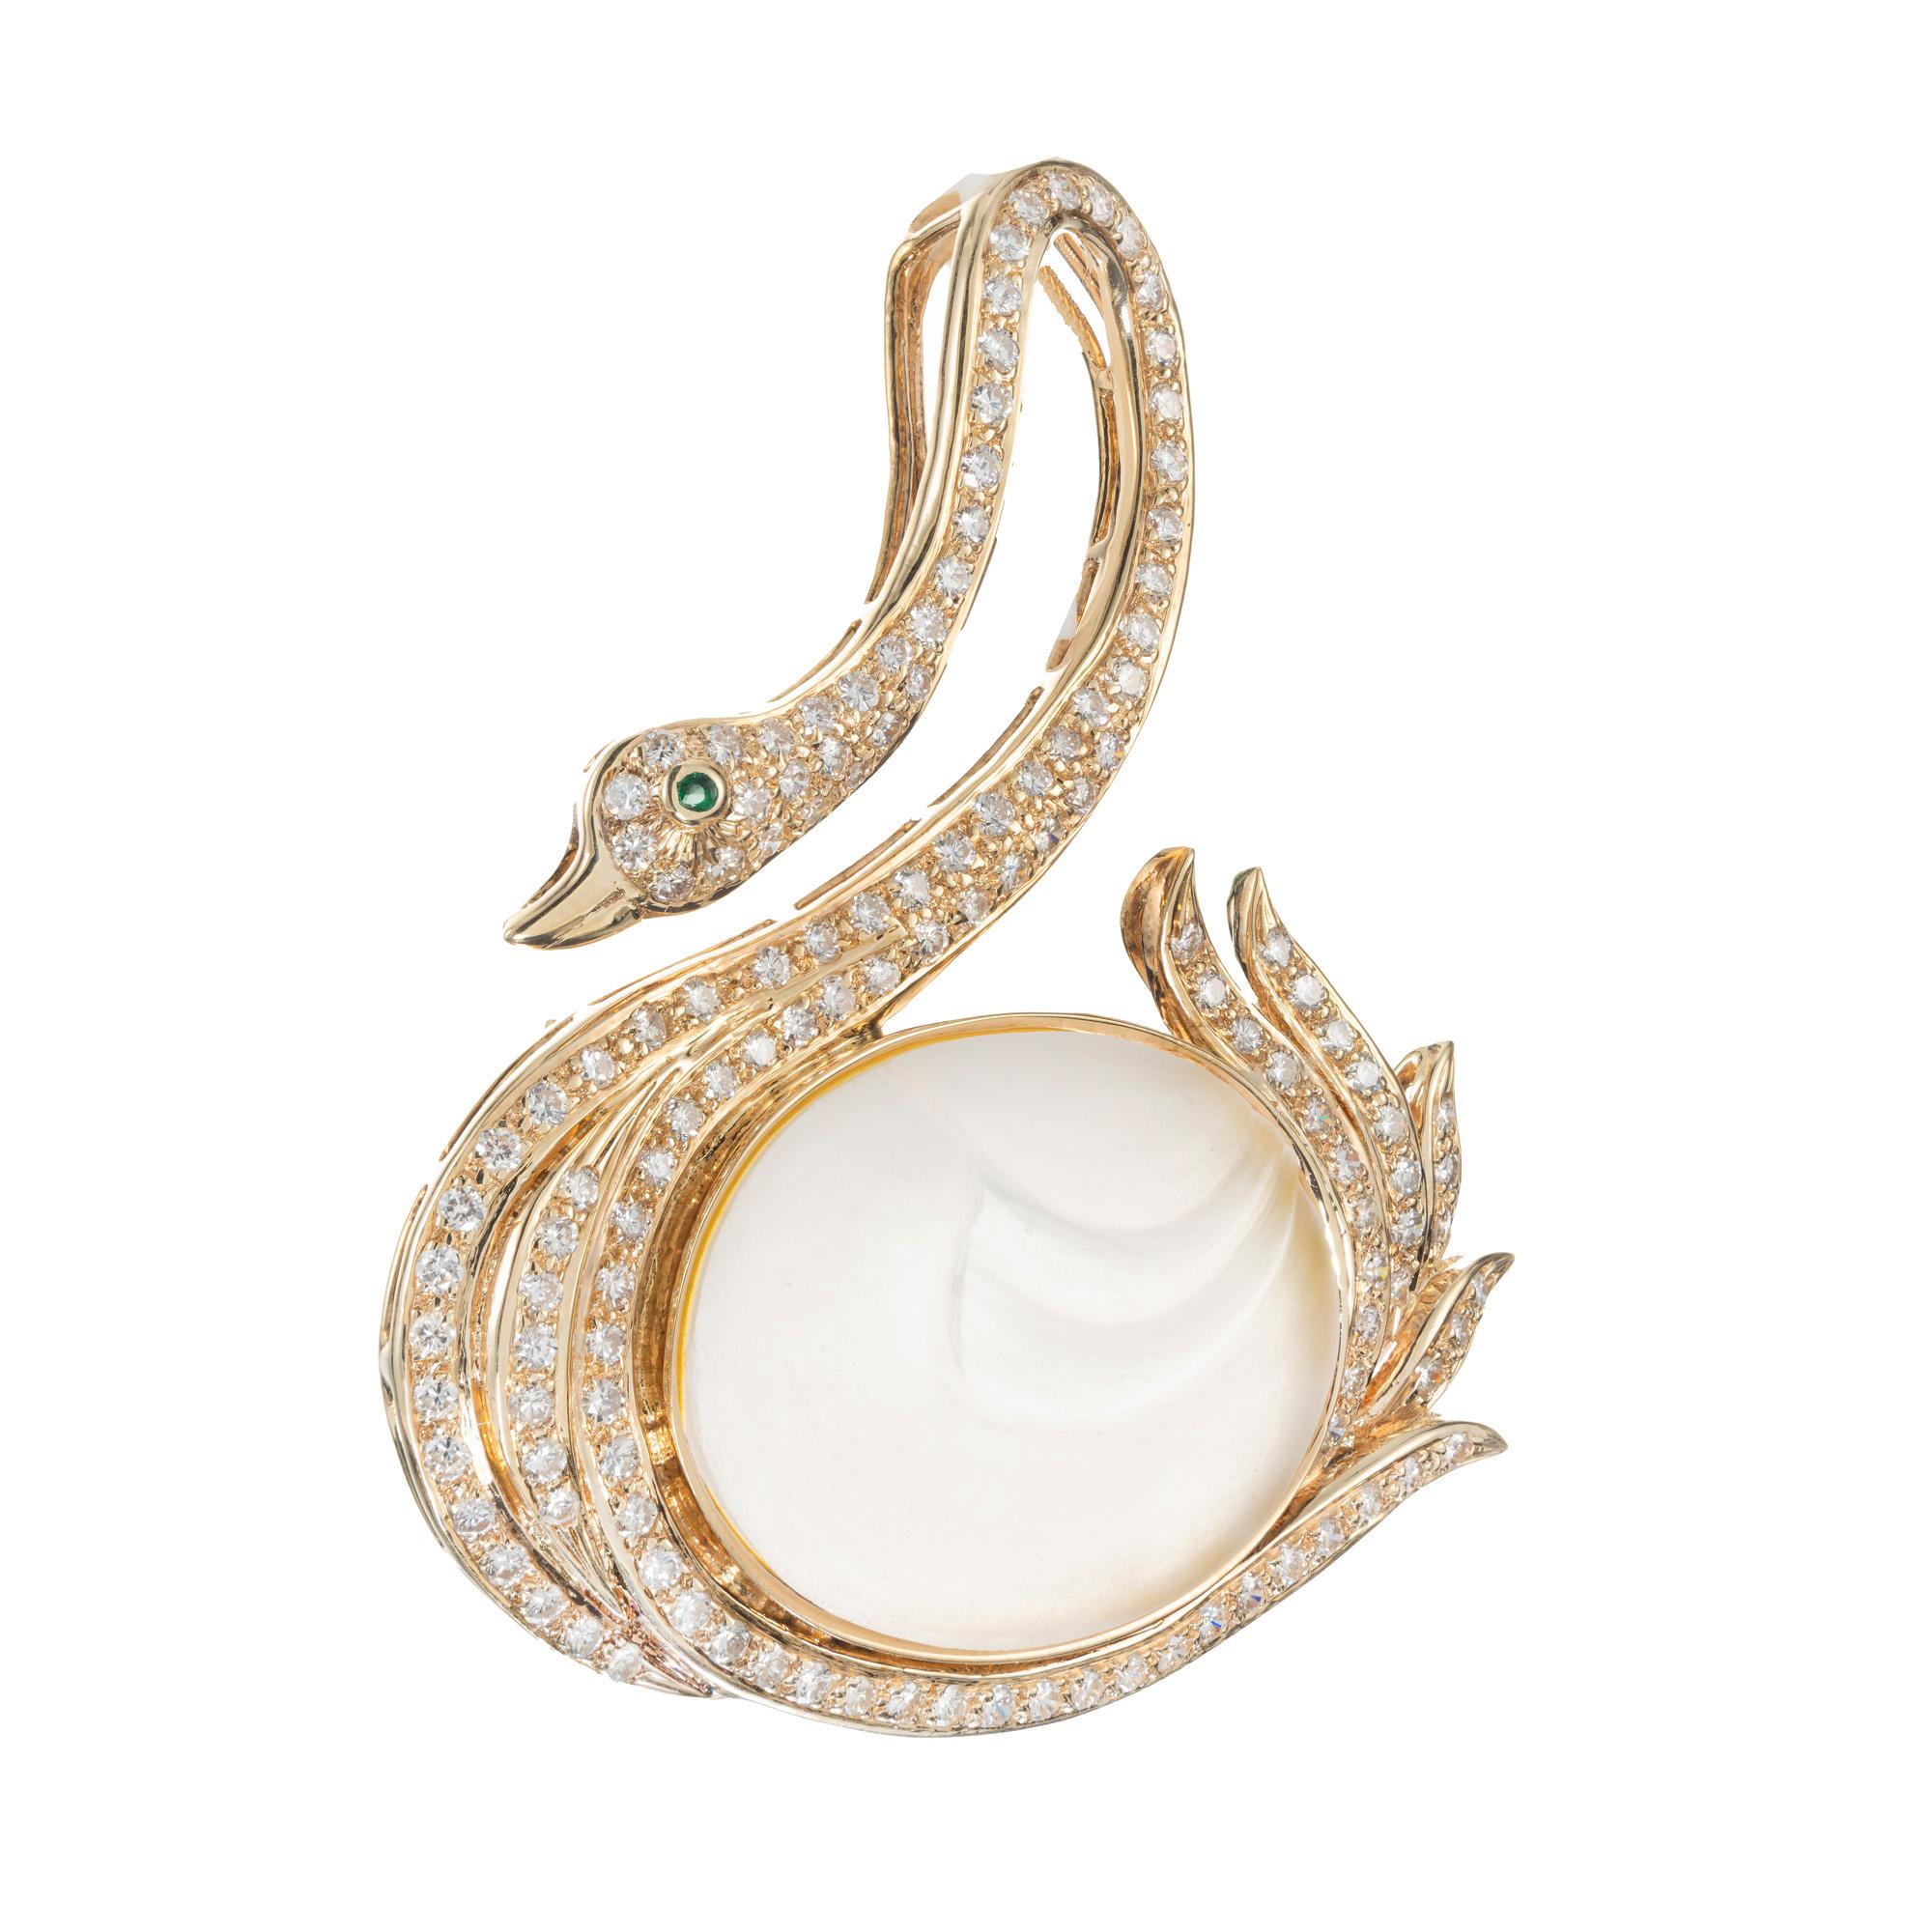 Swan diamond and emerald brooch. Bezel set oval carved Angel Skin quartz in a beautifully crafted Swan setting accented with 133 round cut diamonds and 1 round cut emerald eye.  

1 oval carved angel skin quartz
133 round diamonds, H-I VS SI approx.